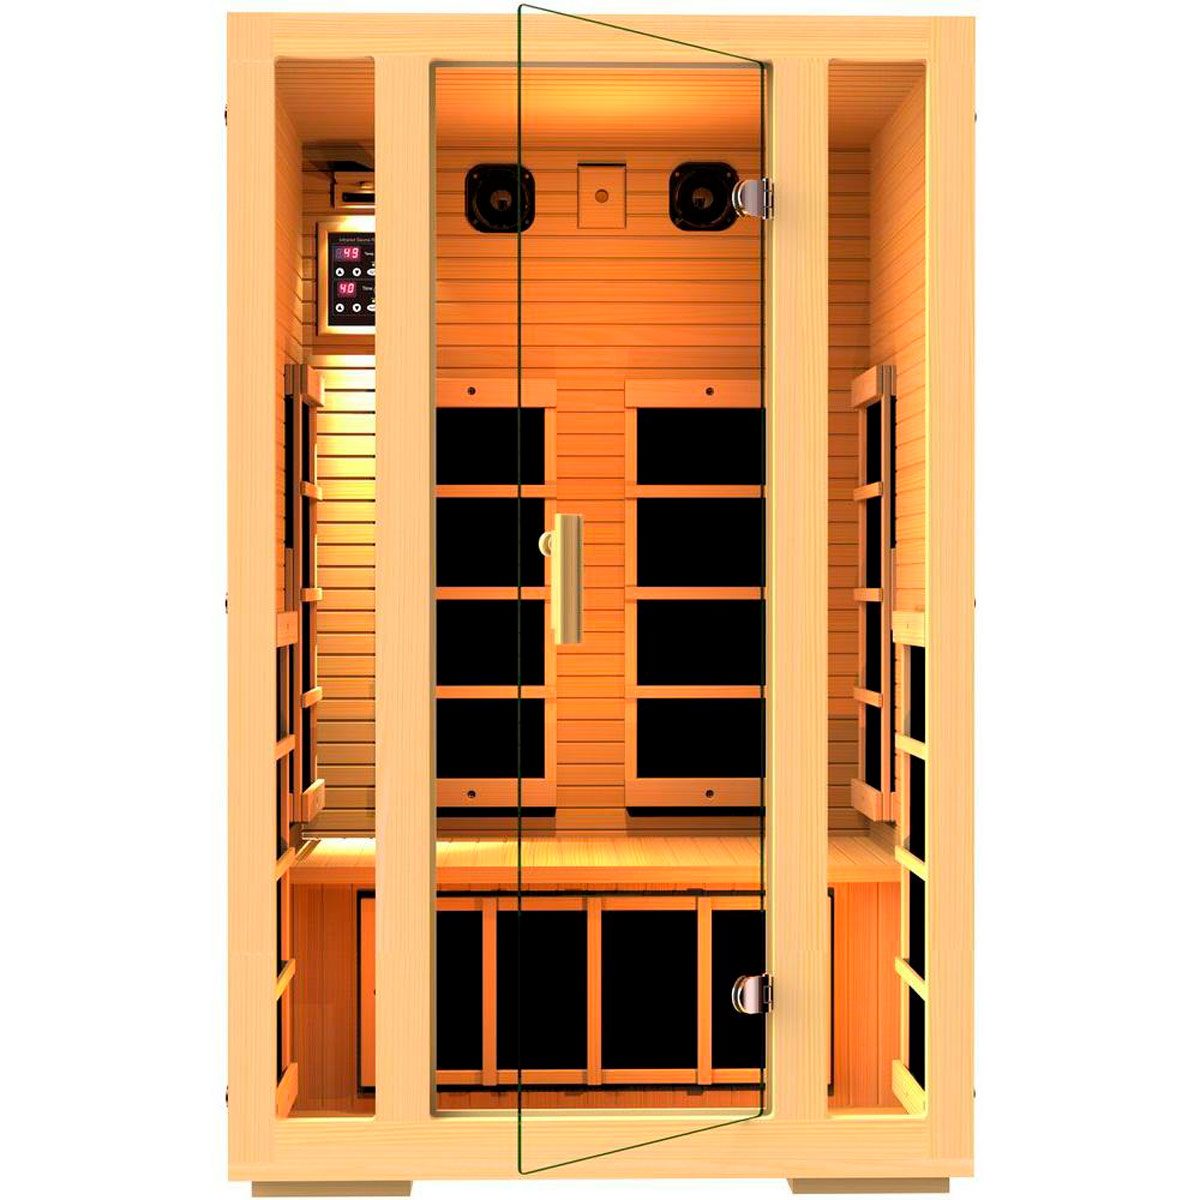 What's the Best Infrared Sauna for Your Home?